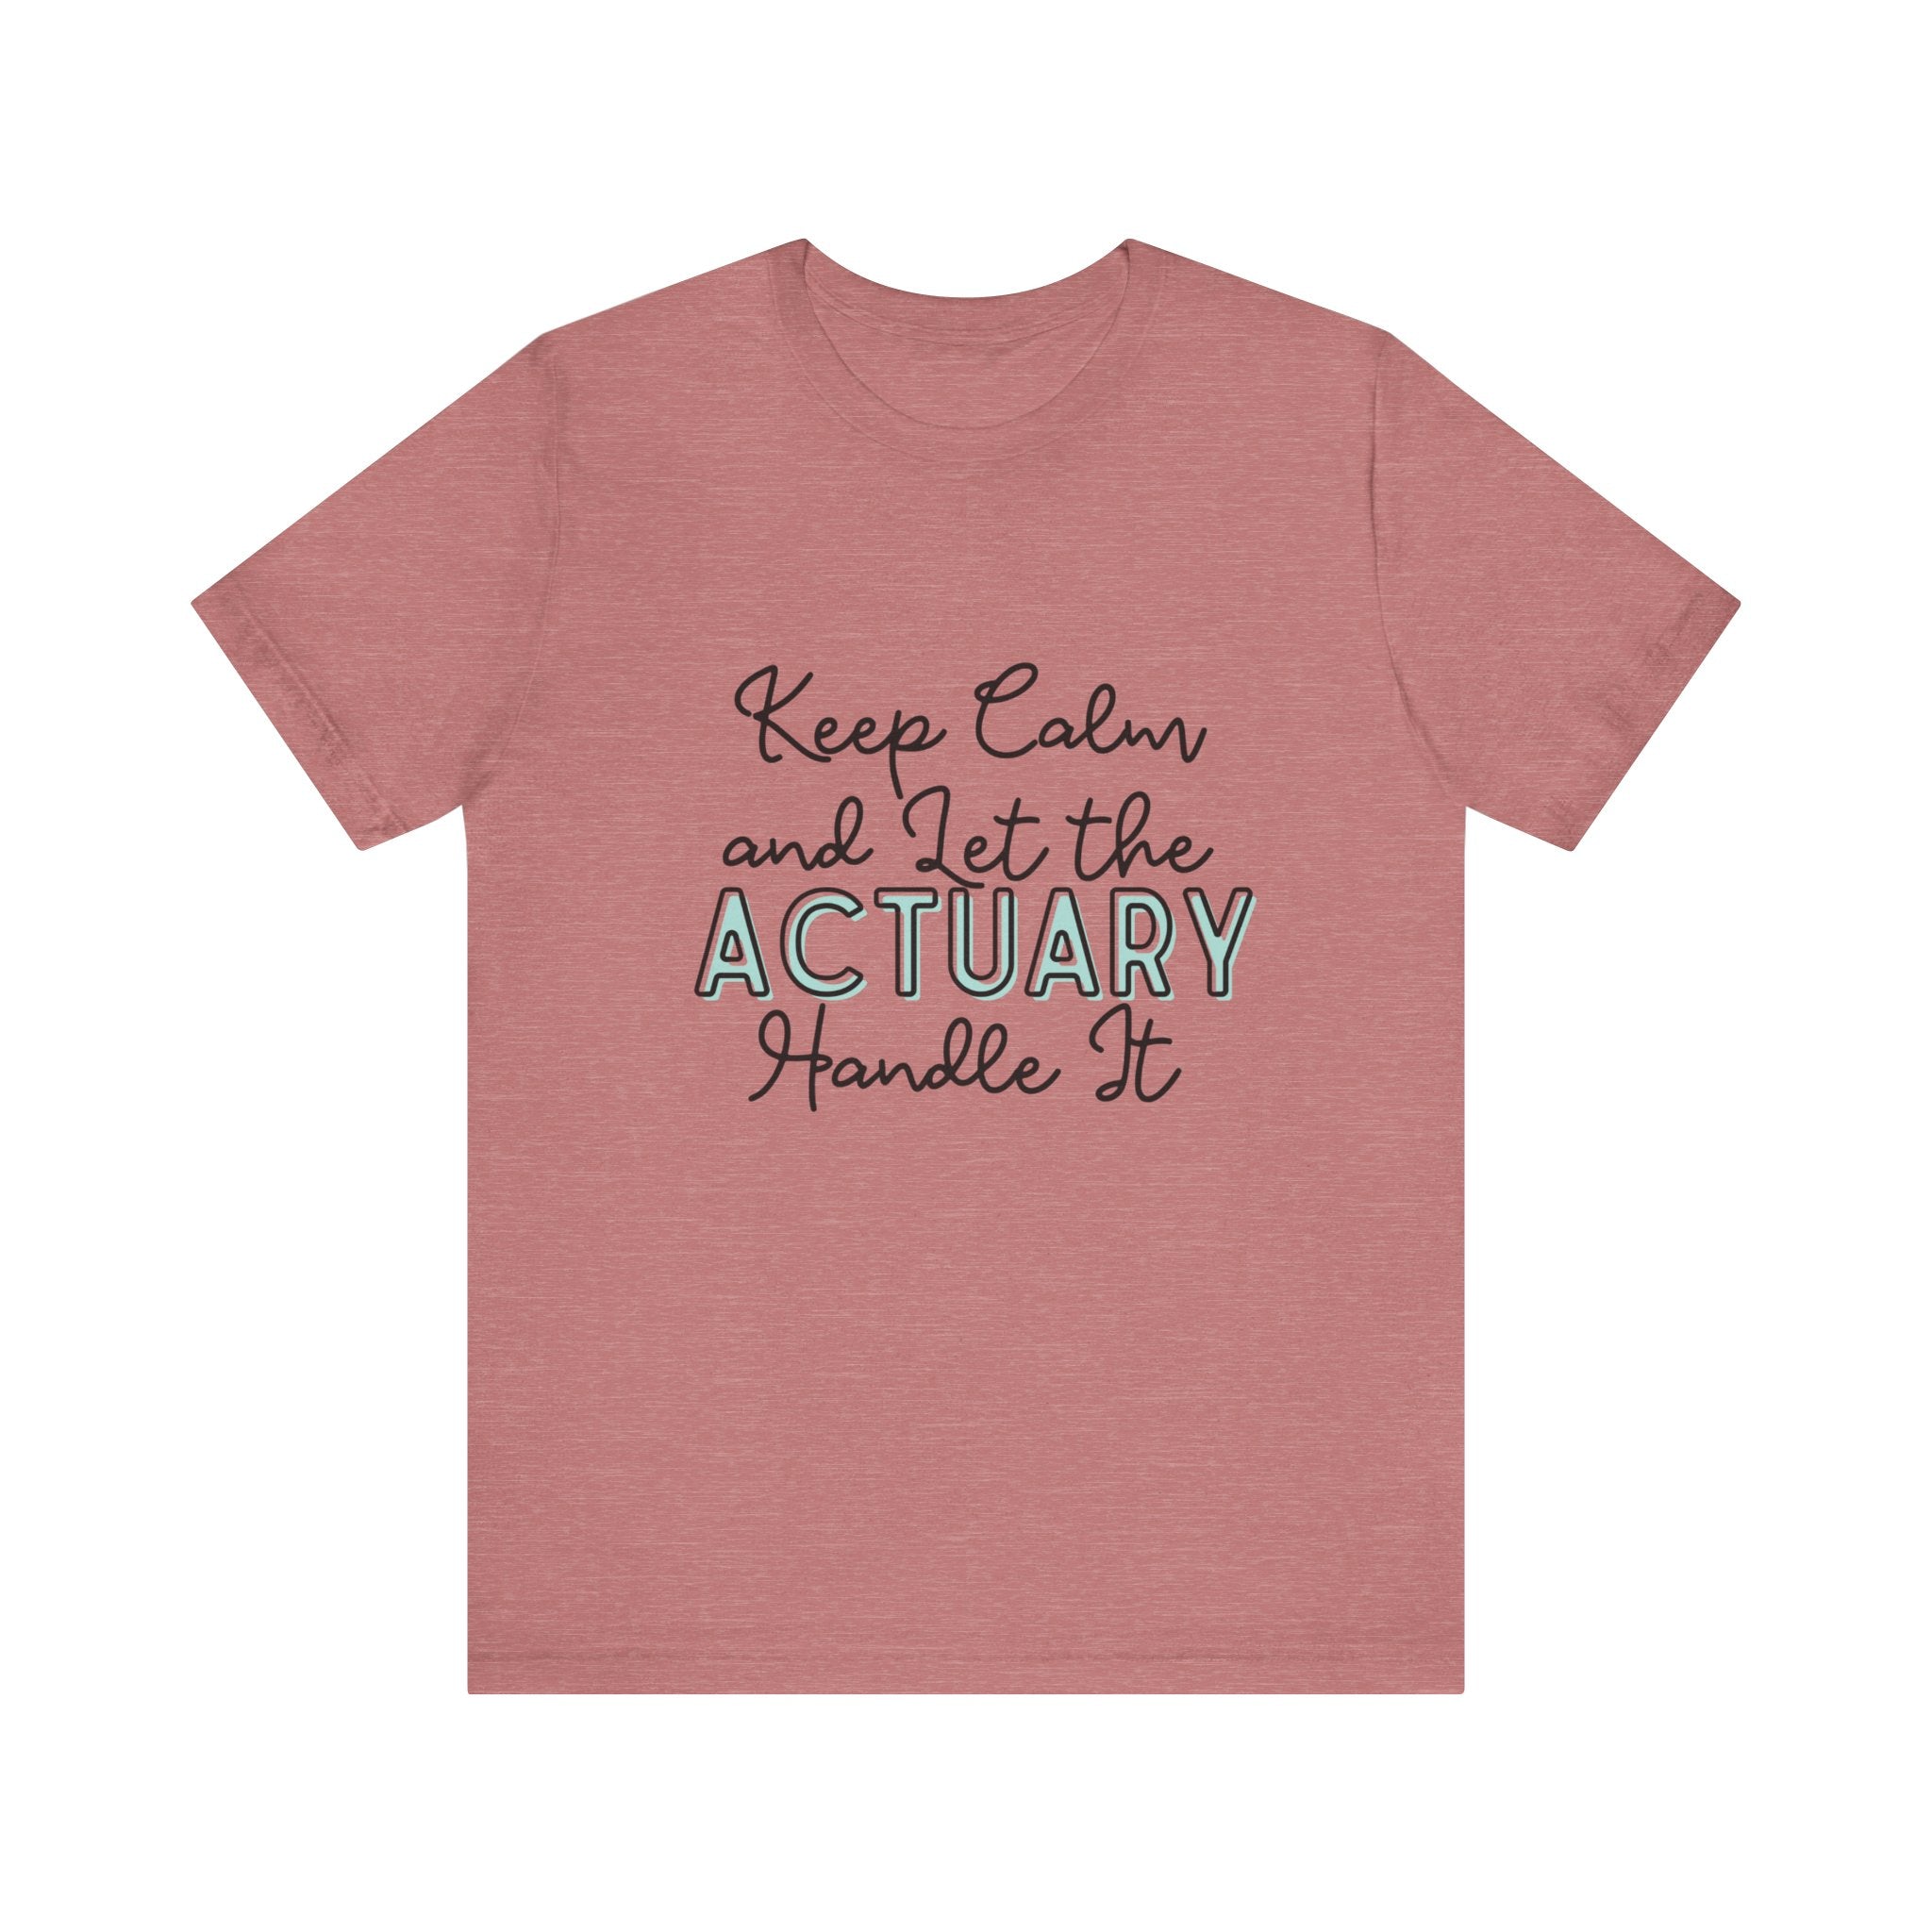 Keep Calm and let the Actuary handle It - Jersey Short Sleeve Tee